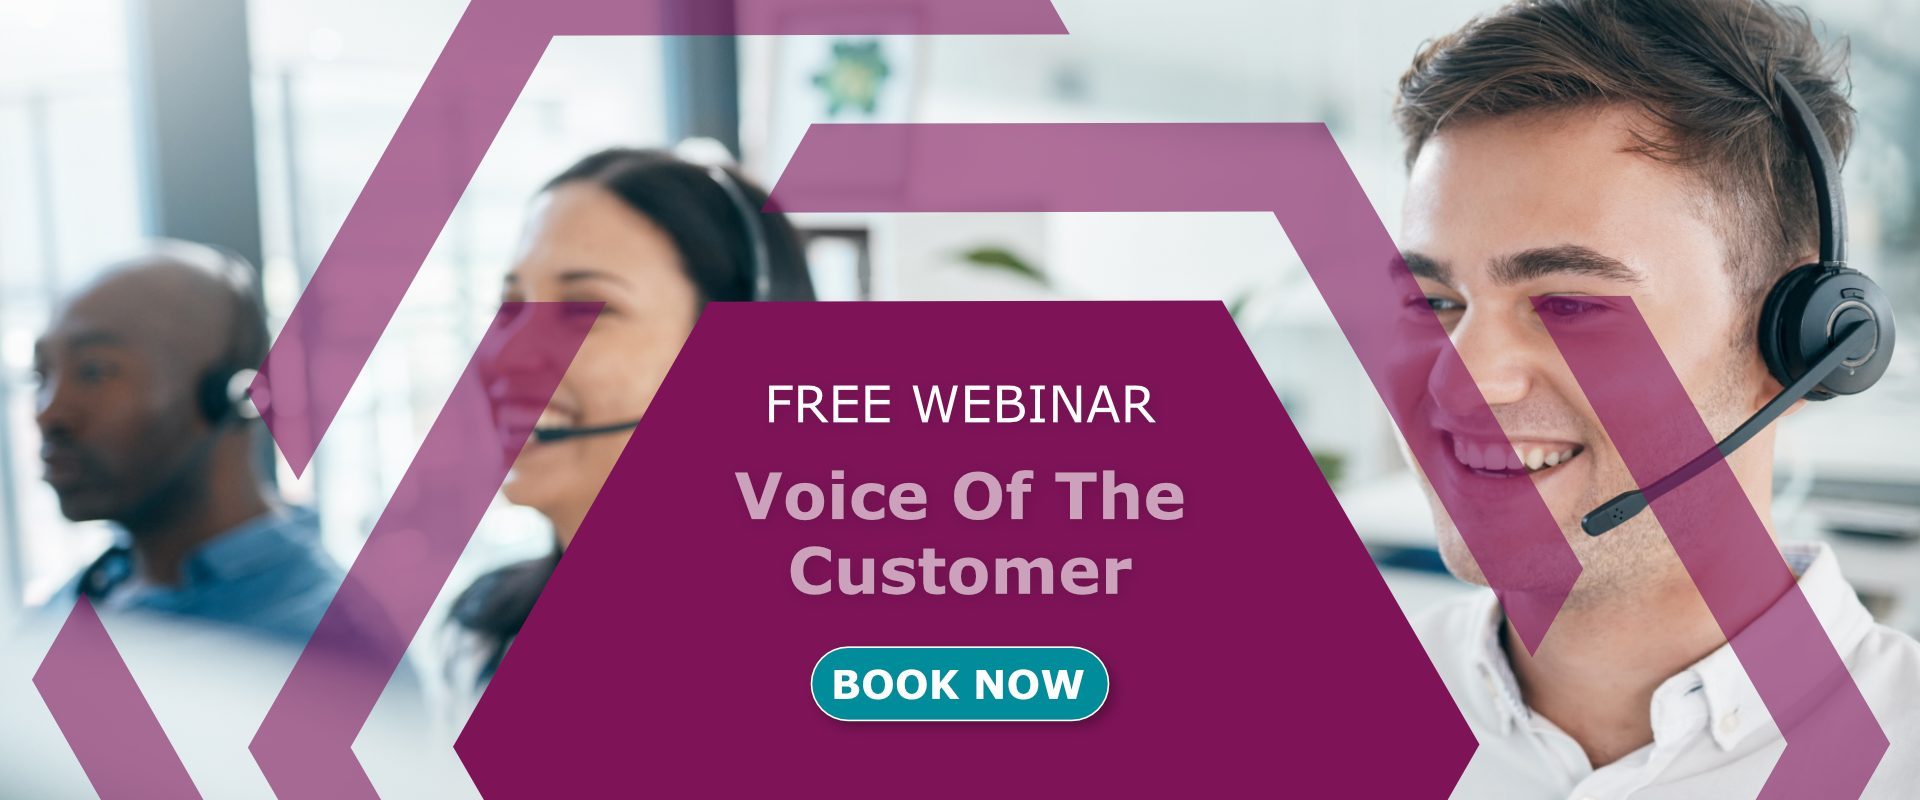 Voice Of The Customer